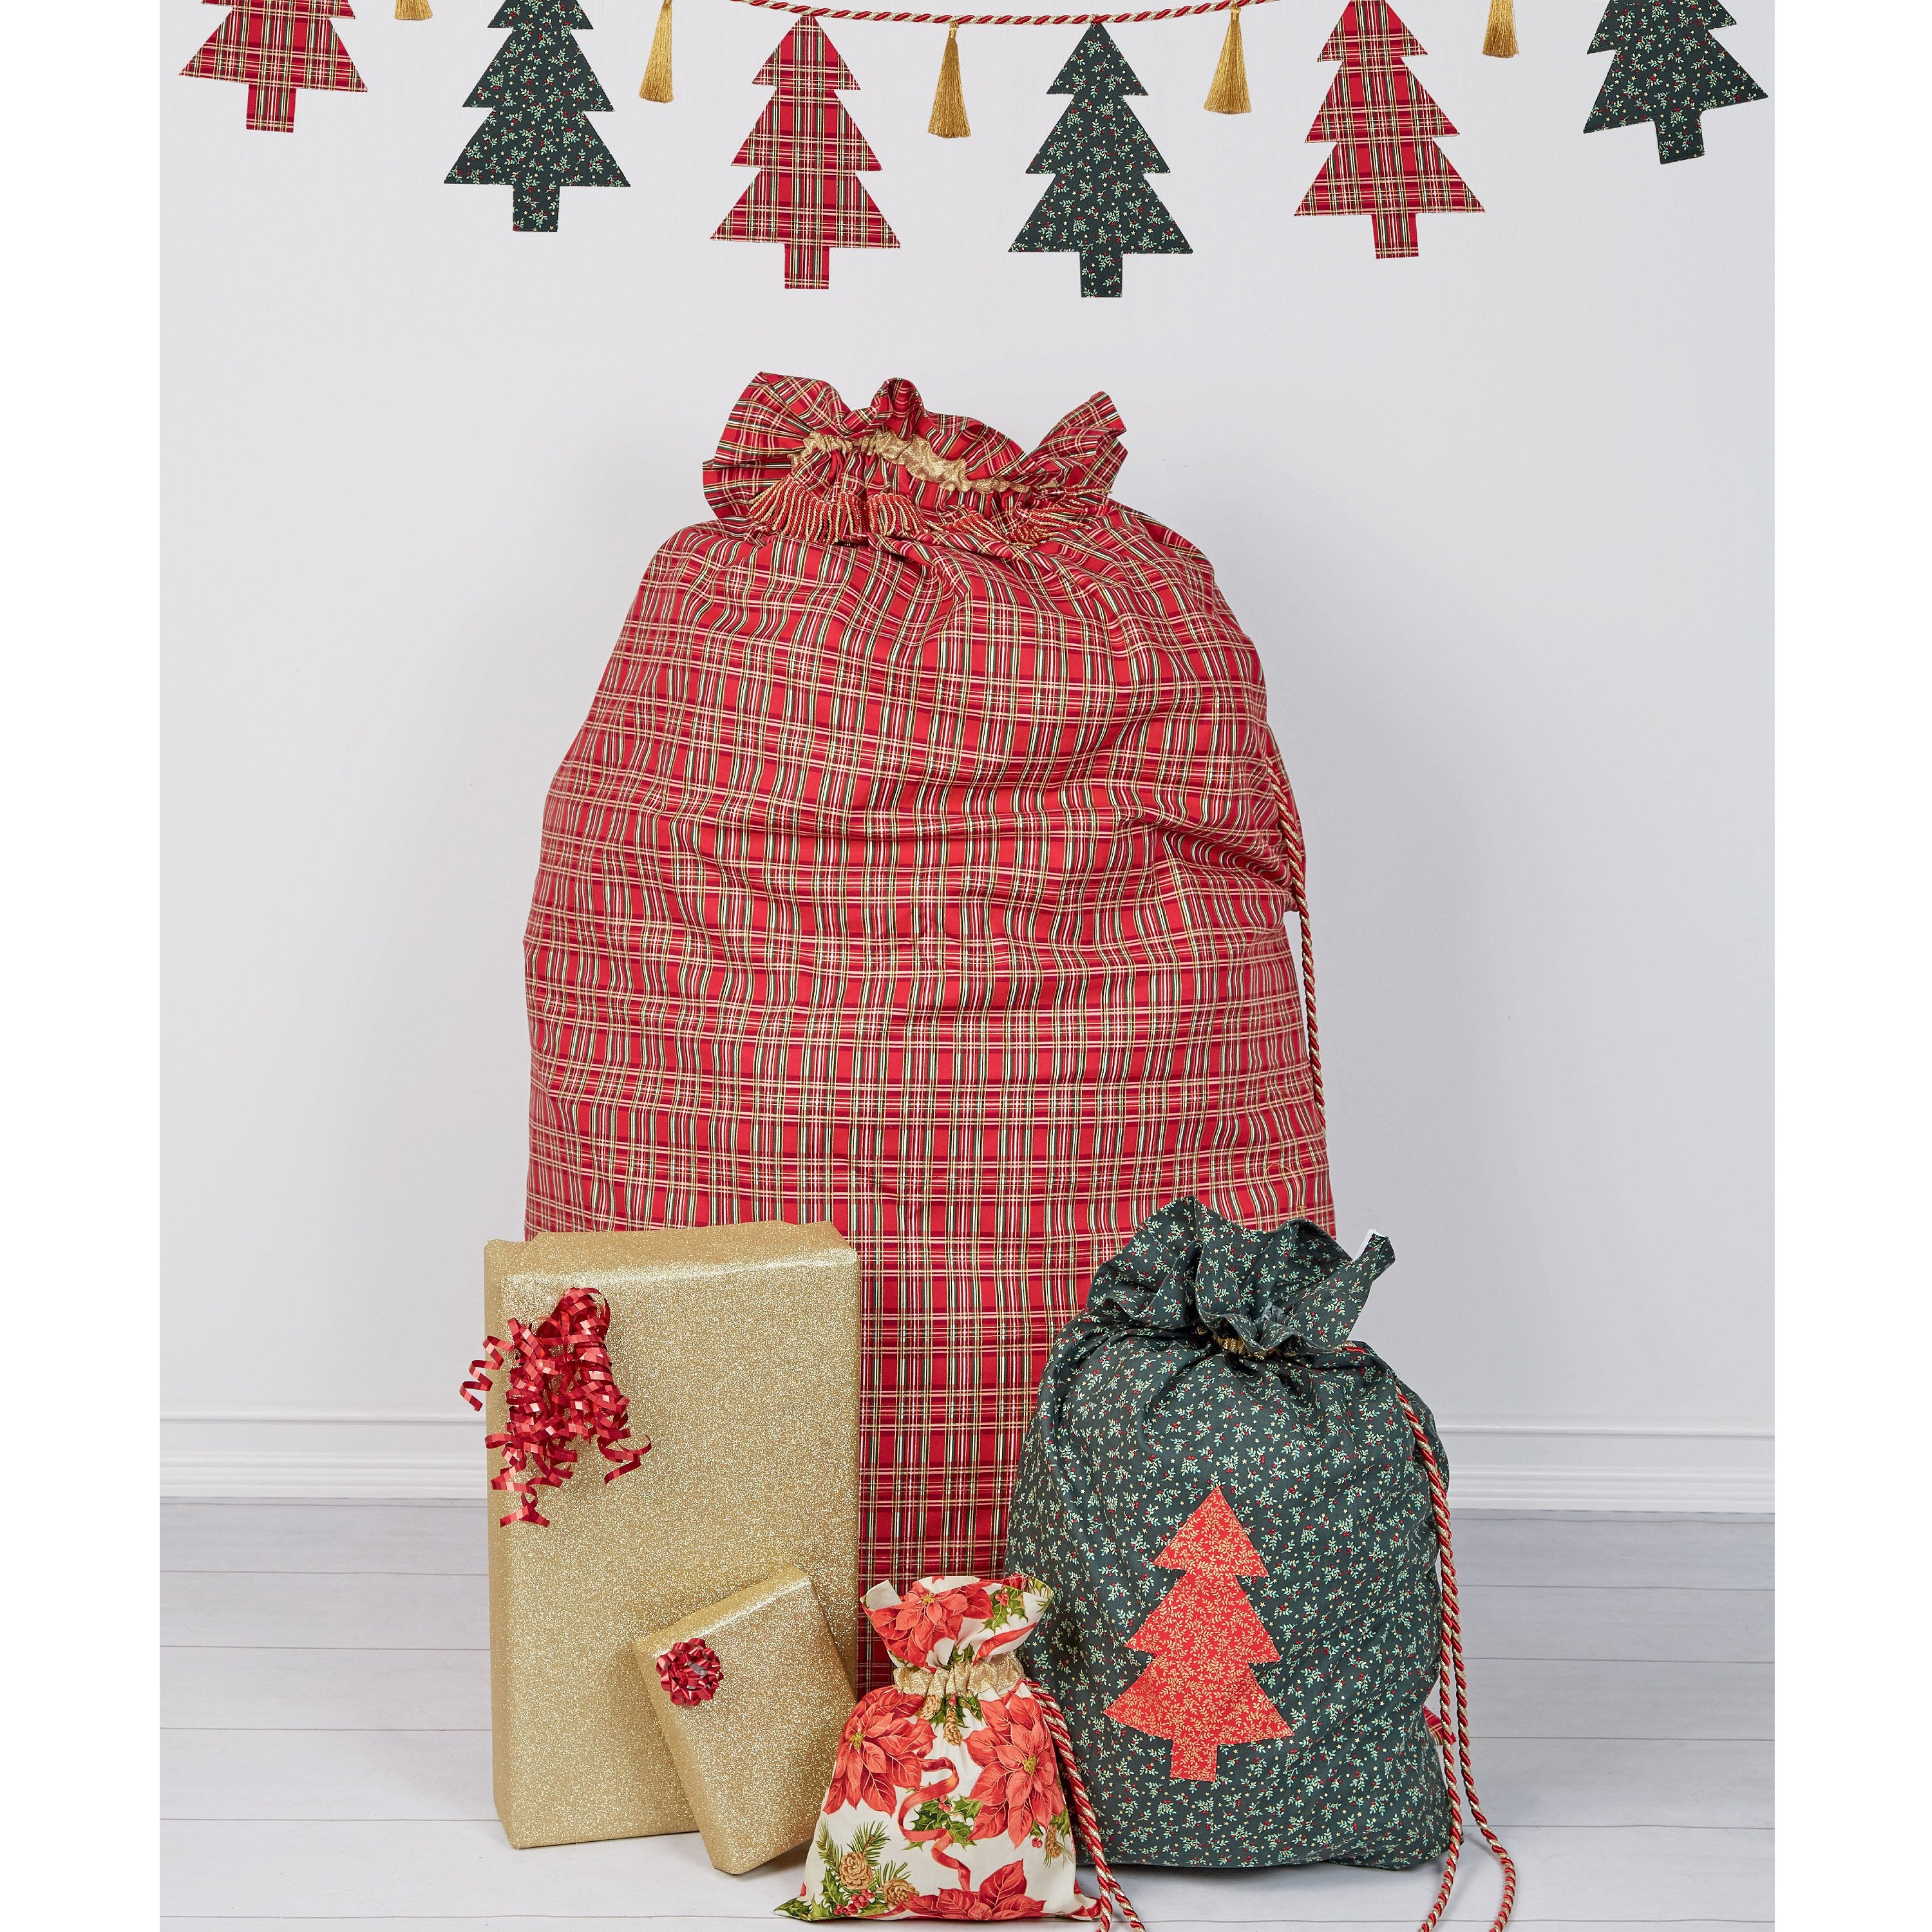 Simplicity Sewing Pattern 9428 Christmas Stockings and accessories from Jaycotts Sewing Supplies